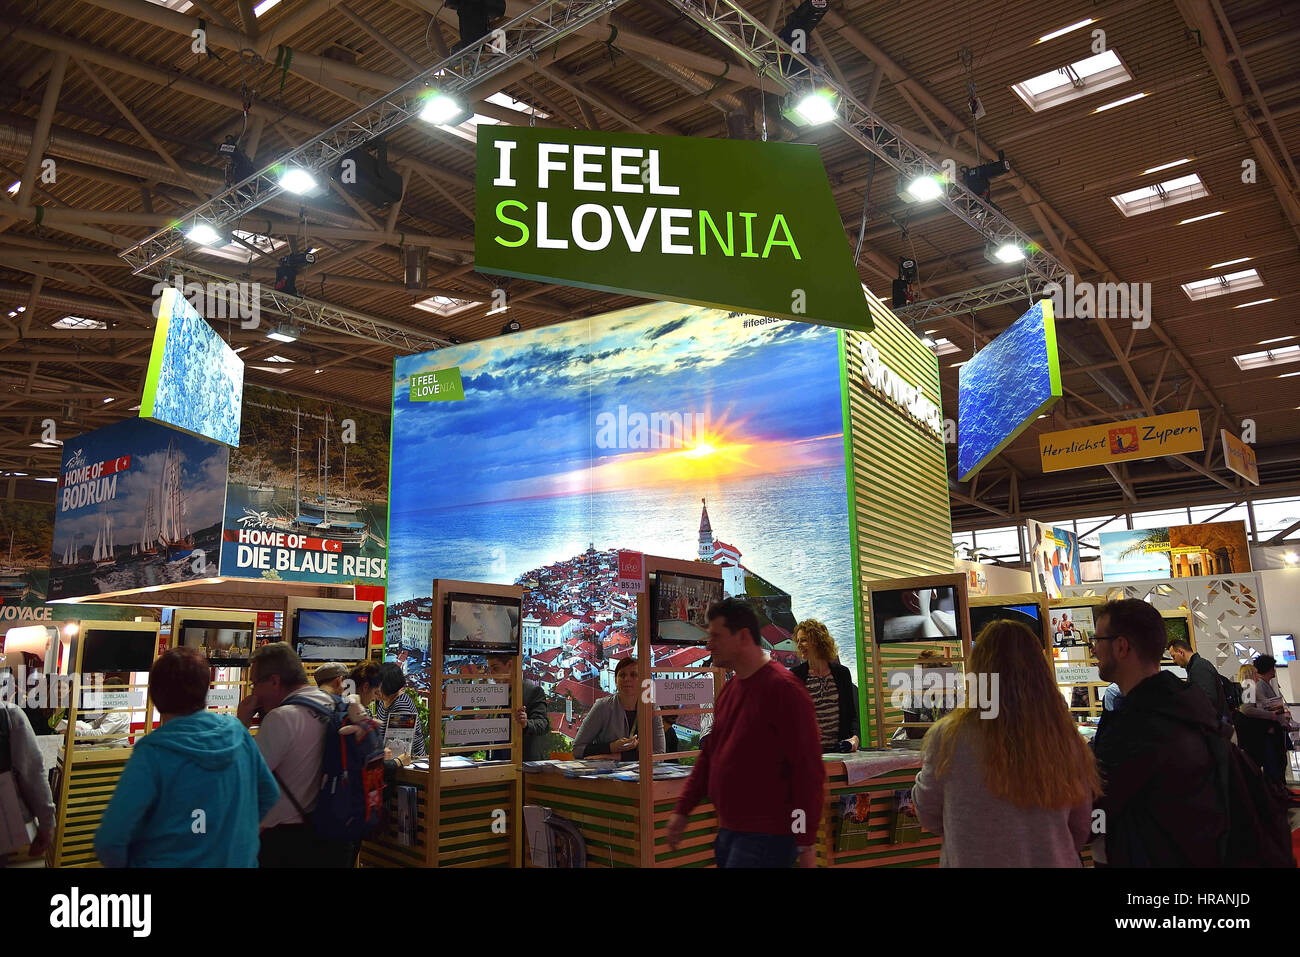 February 26, 2017 - The interactive fair for leisure and travel has taken place in Munich from 22nd to 26th February. The fair is Bavaria's most popular fair in the fields of travel, leisure and recreation, offering the most beautiful travel destinations and latest recreation trends. The 2017 F.re.e fair featured the following themes: travel, health & wellness, caravanning & mobile recreation, water sports, outdoor and bicycles displaying products and services, the latest trends, and plenty of activities in which visitors actively participated (Credit Image: © Abdelwaheb Omar/ImagesLive via Z Stock Photo